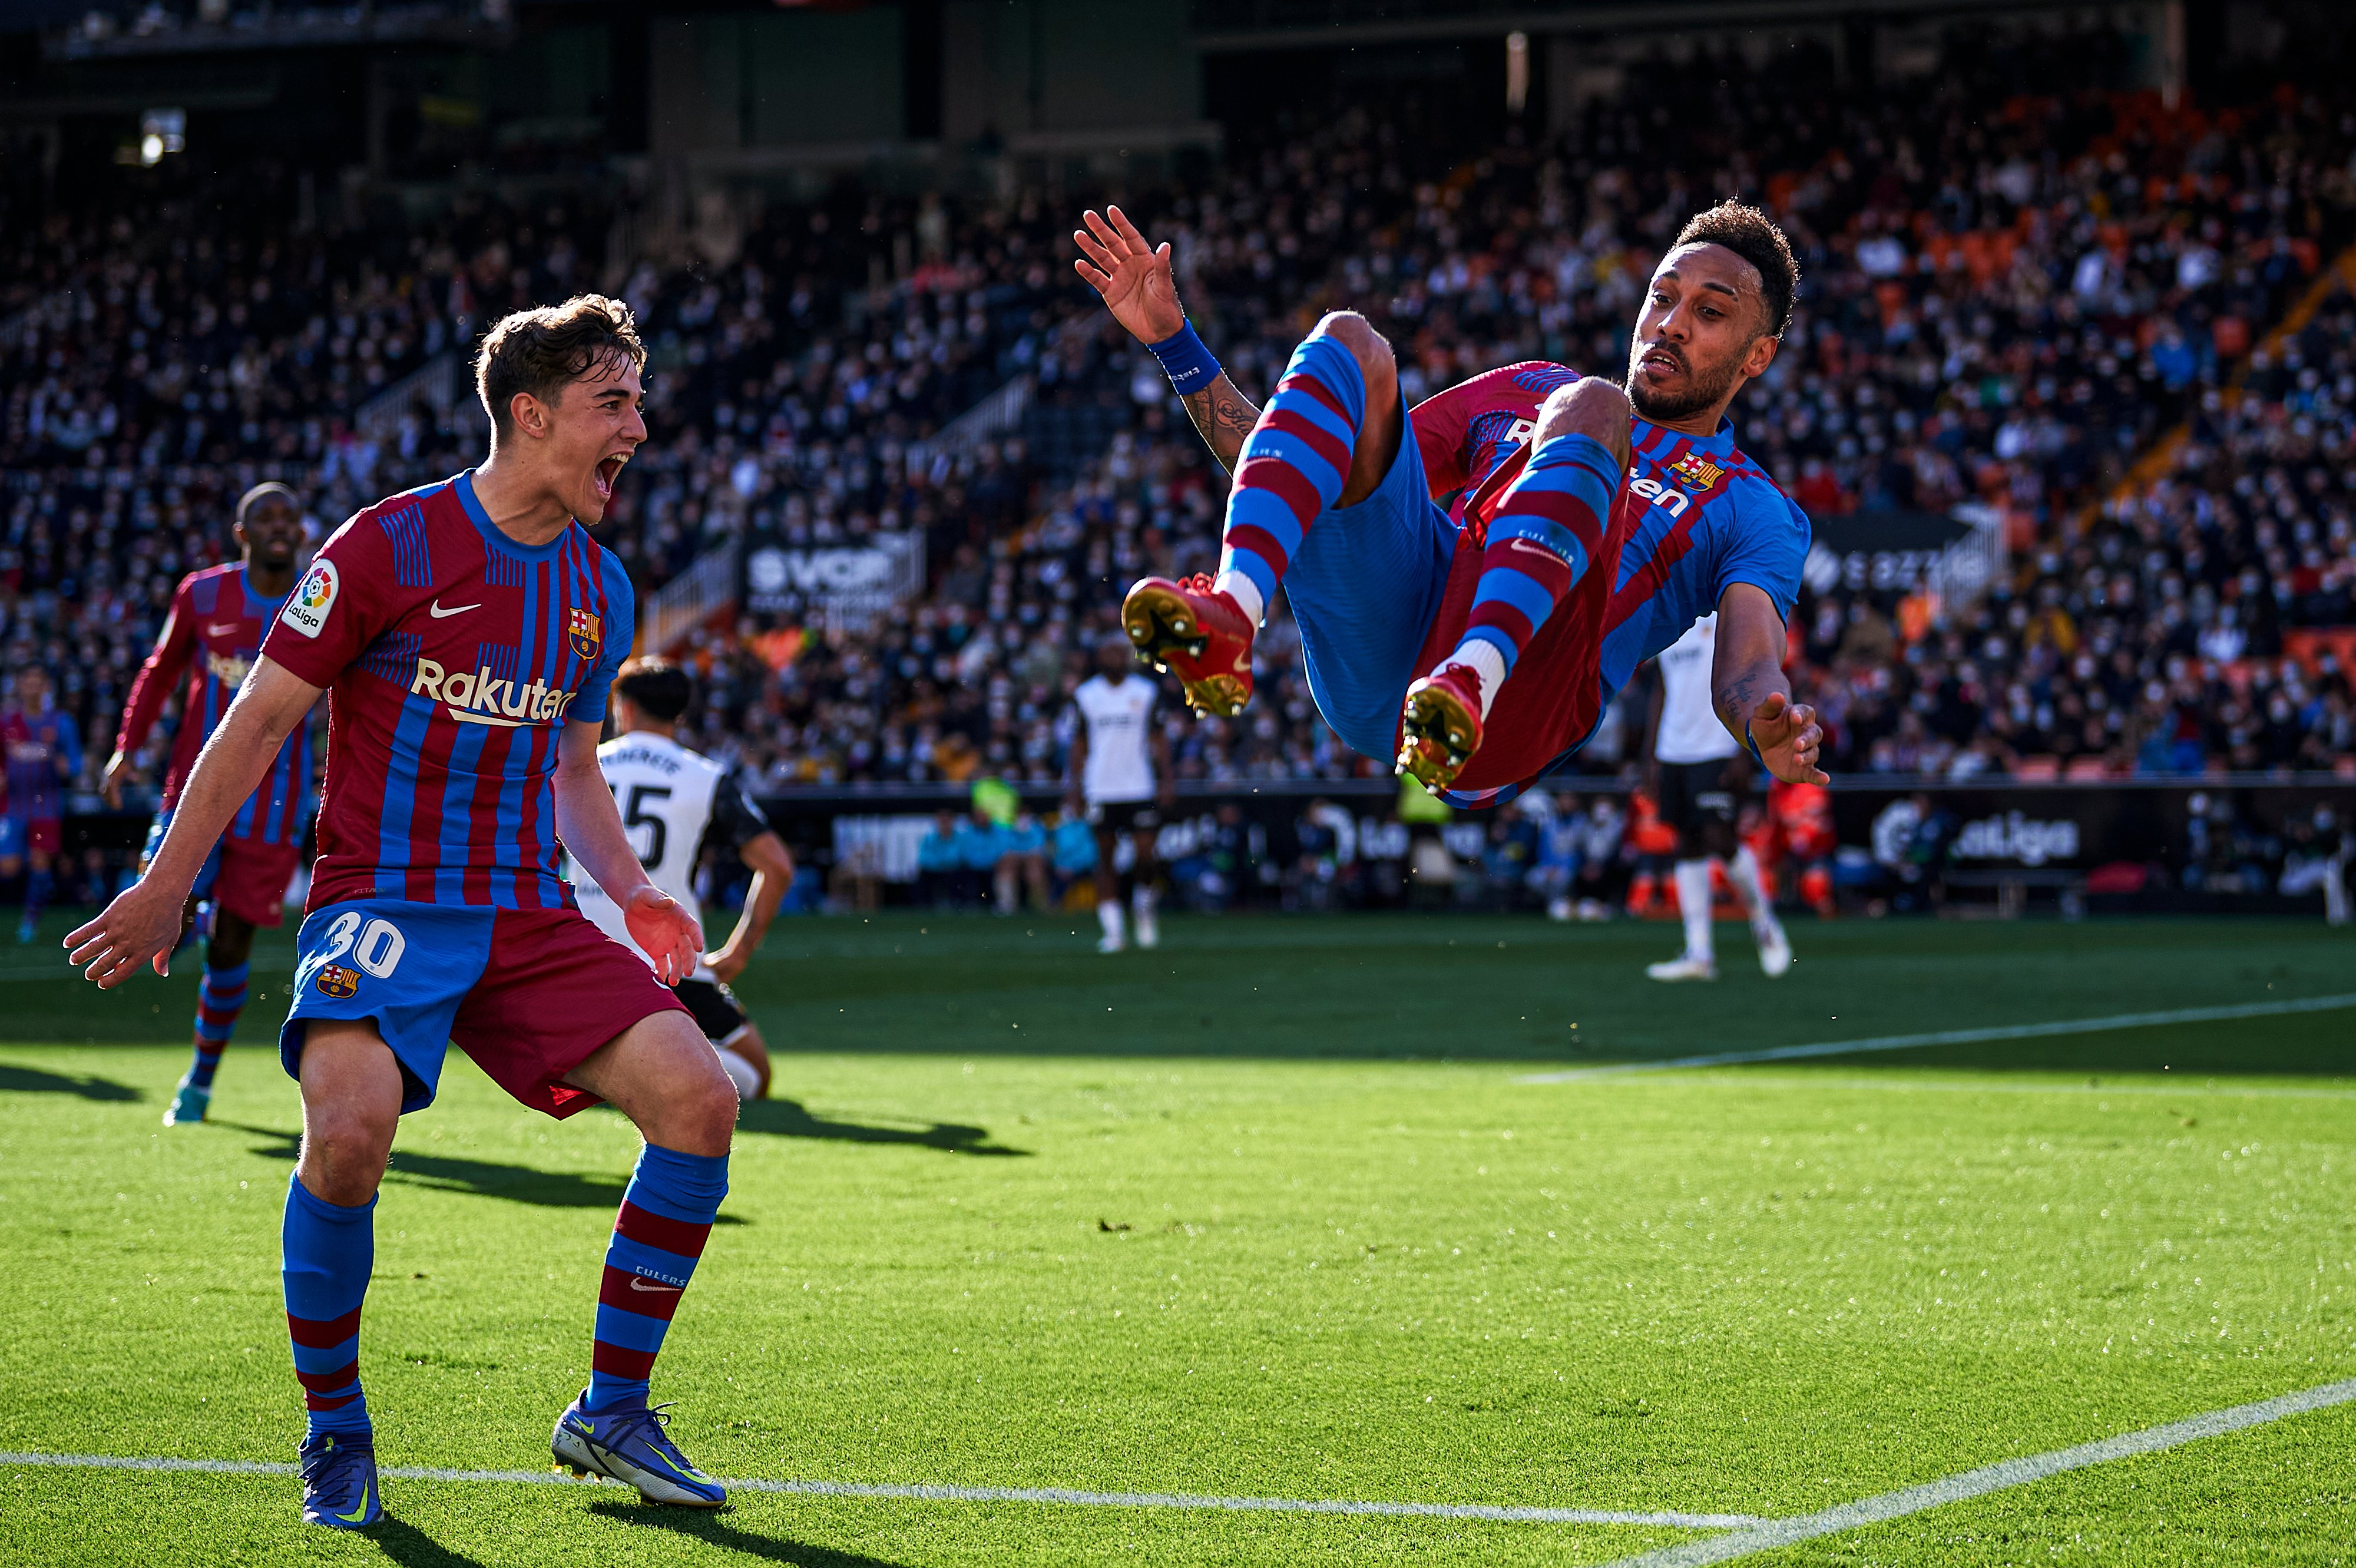 Valencia 1-4 Barcelona: Pierre-Emerick Aubameyang gets off the mark after scoring a brace for Barcelona as they beat Valencia in stunning fashion 